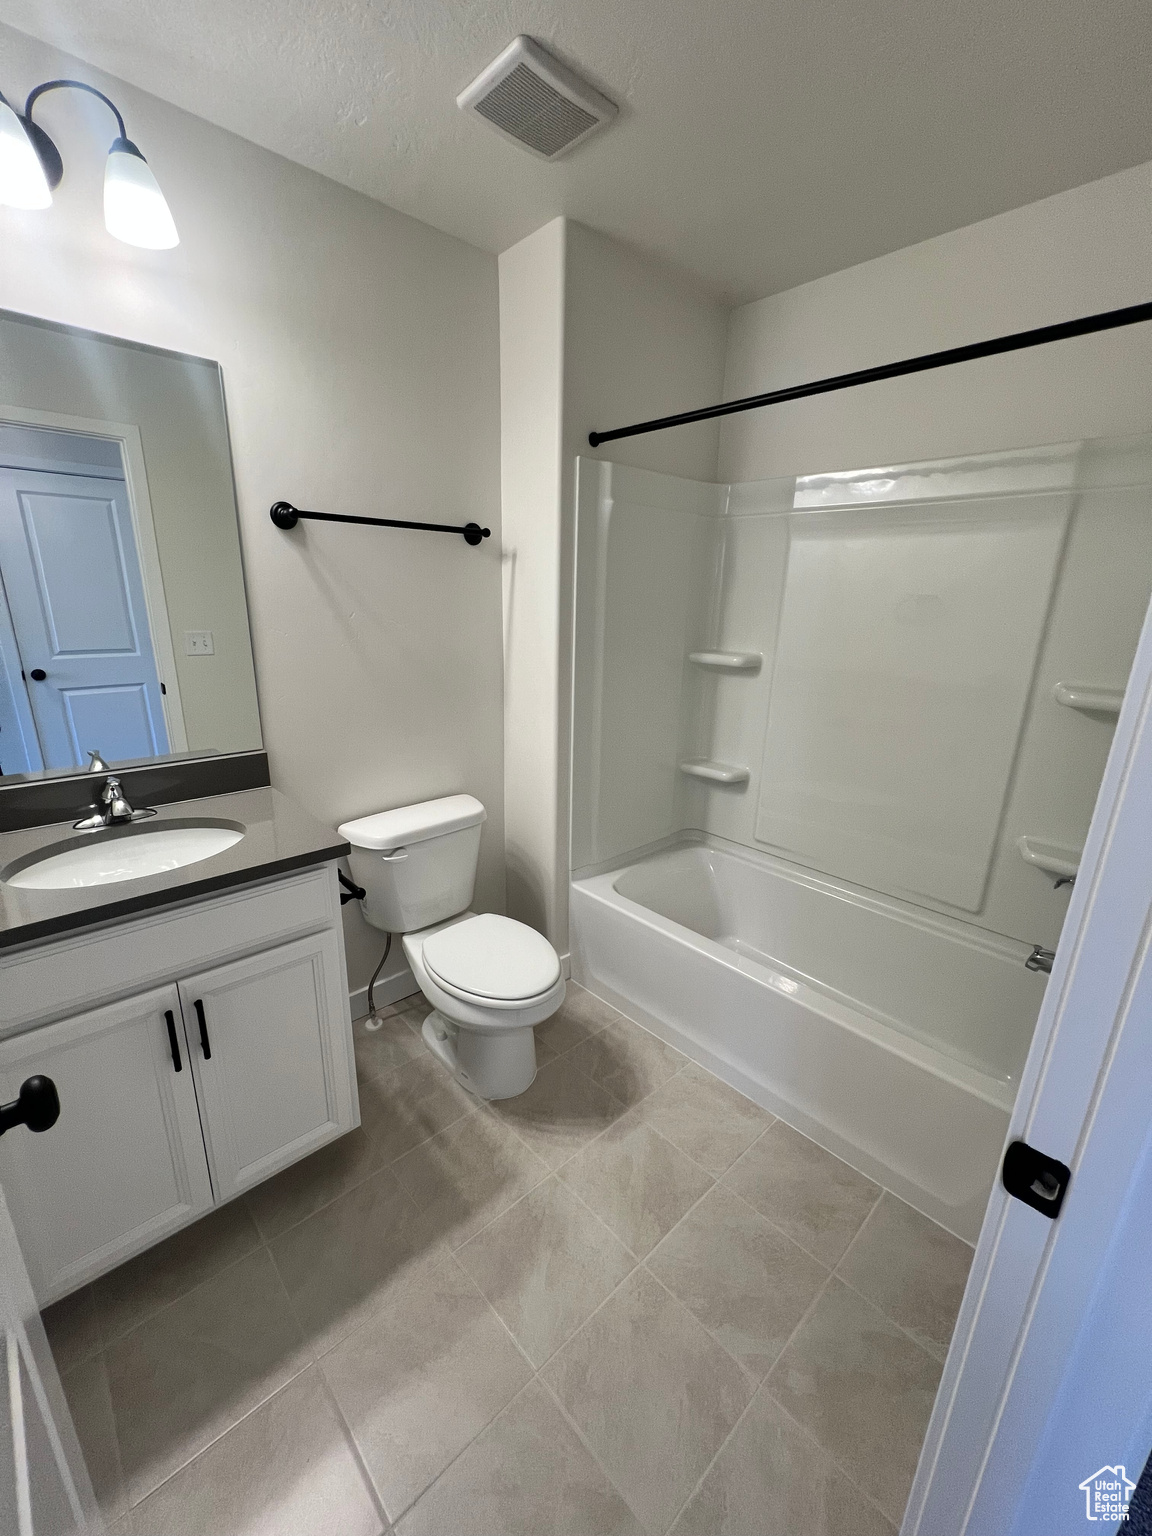 Full bathroom featuring large vanity, shower / bathtub combination, toilet, a textured ceiling, and tile floors